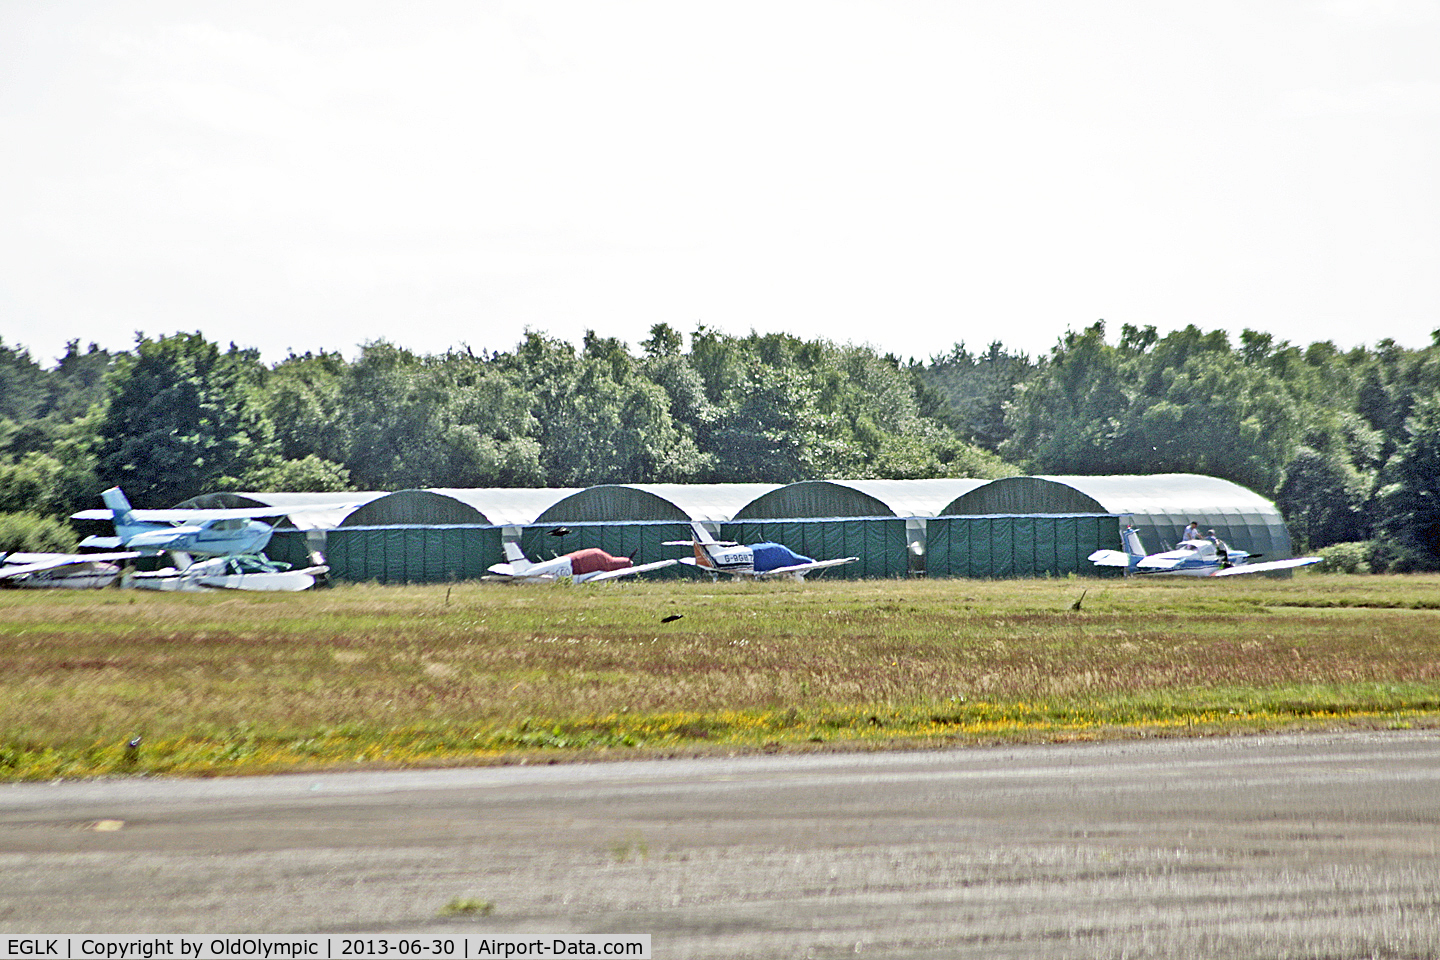 Blackbushe Airport, Camberley, England United Kingdom (EGLK) - New hangarage in place in aircraft park